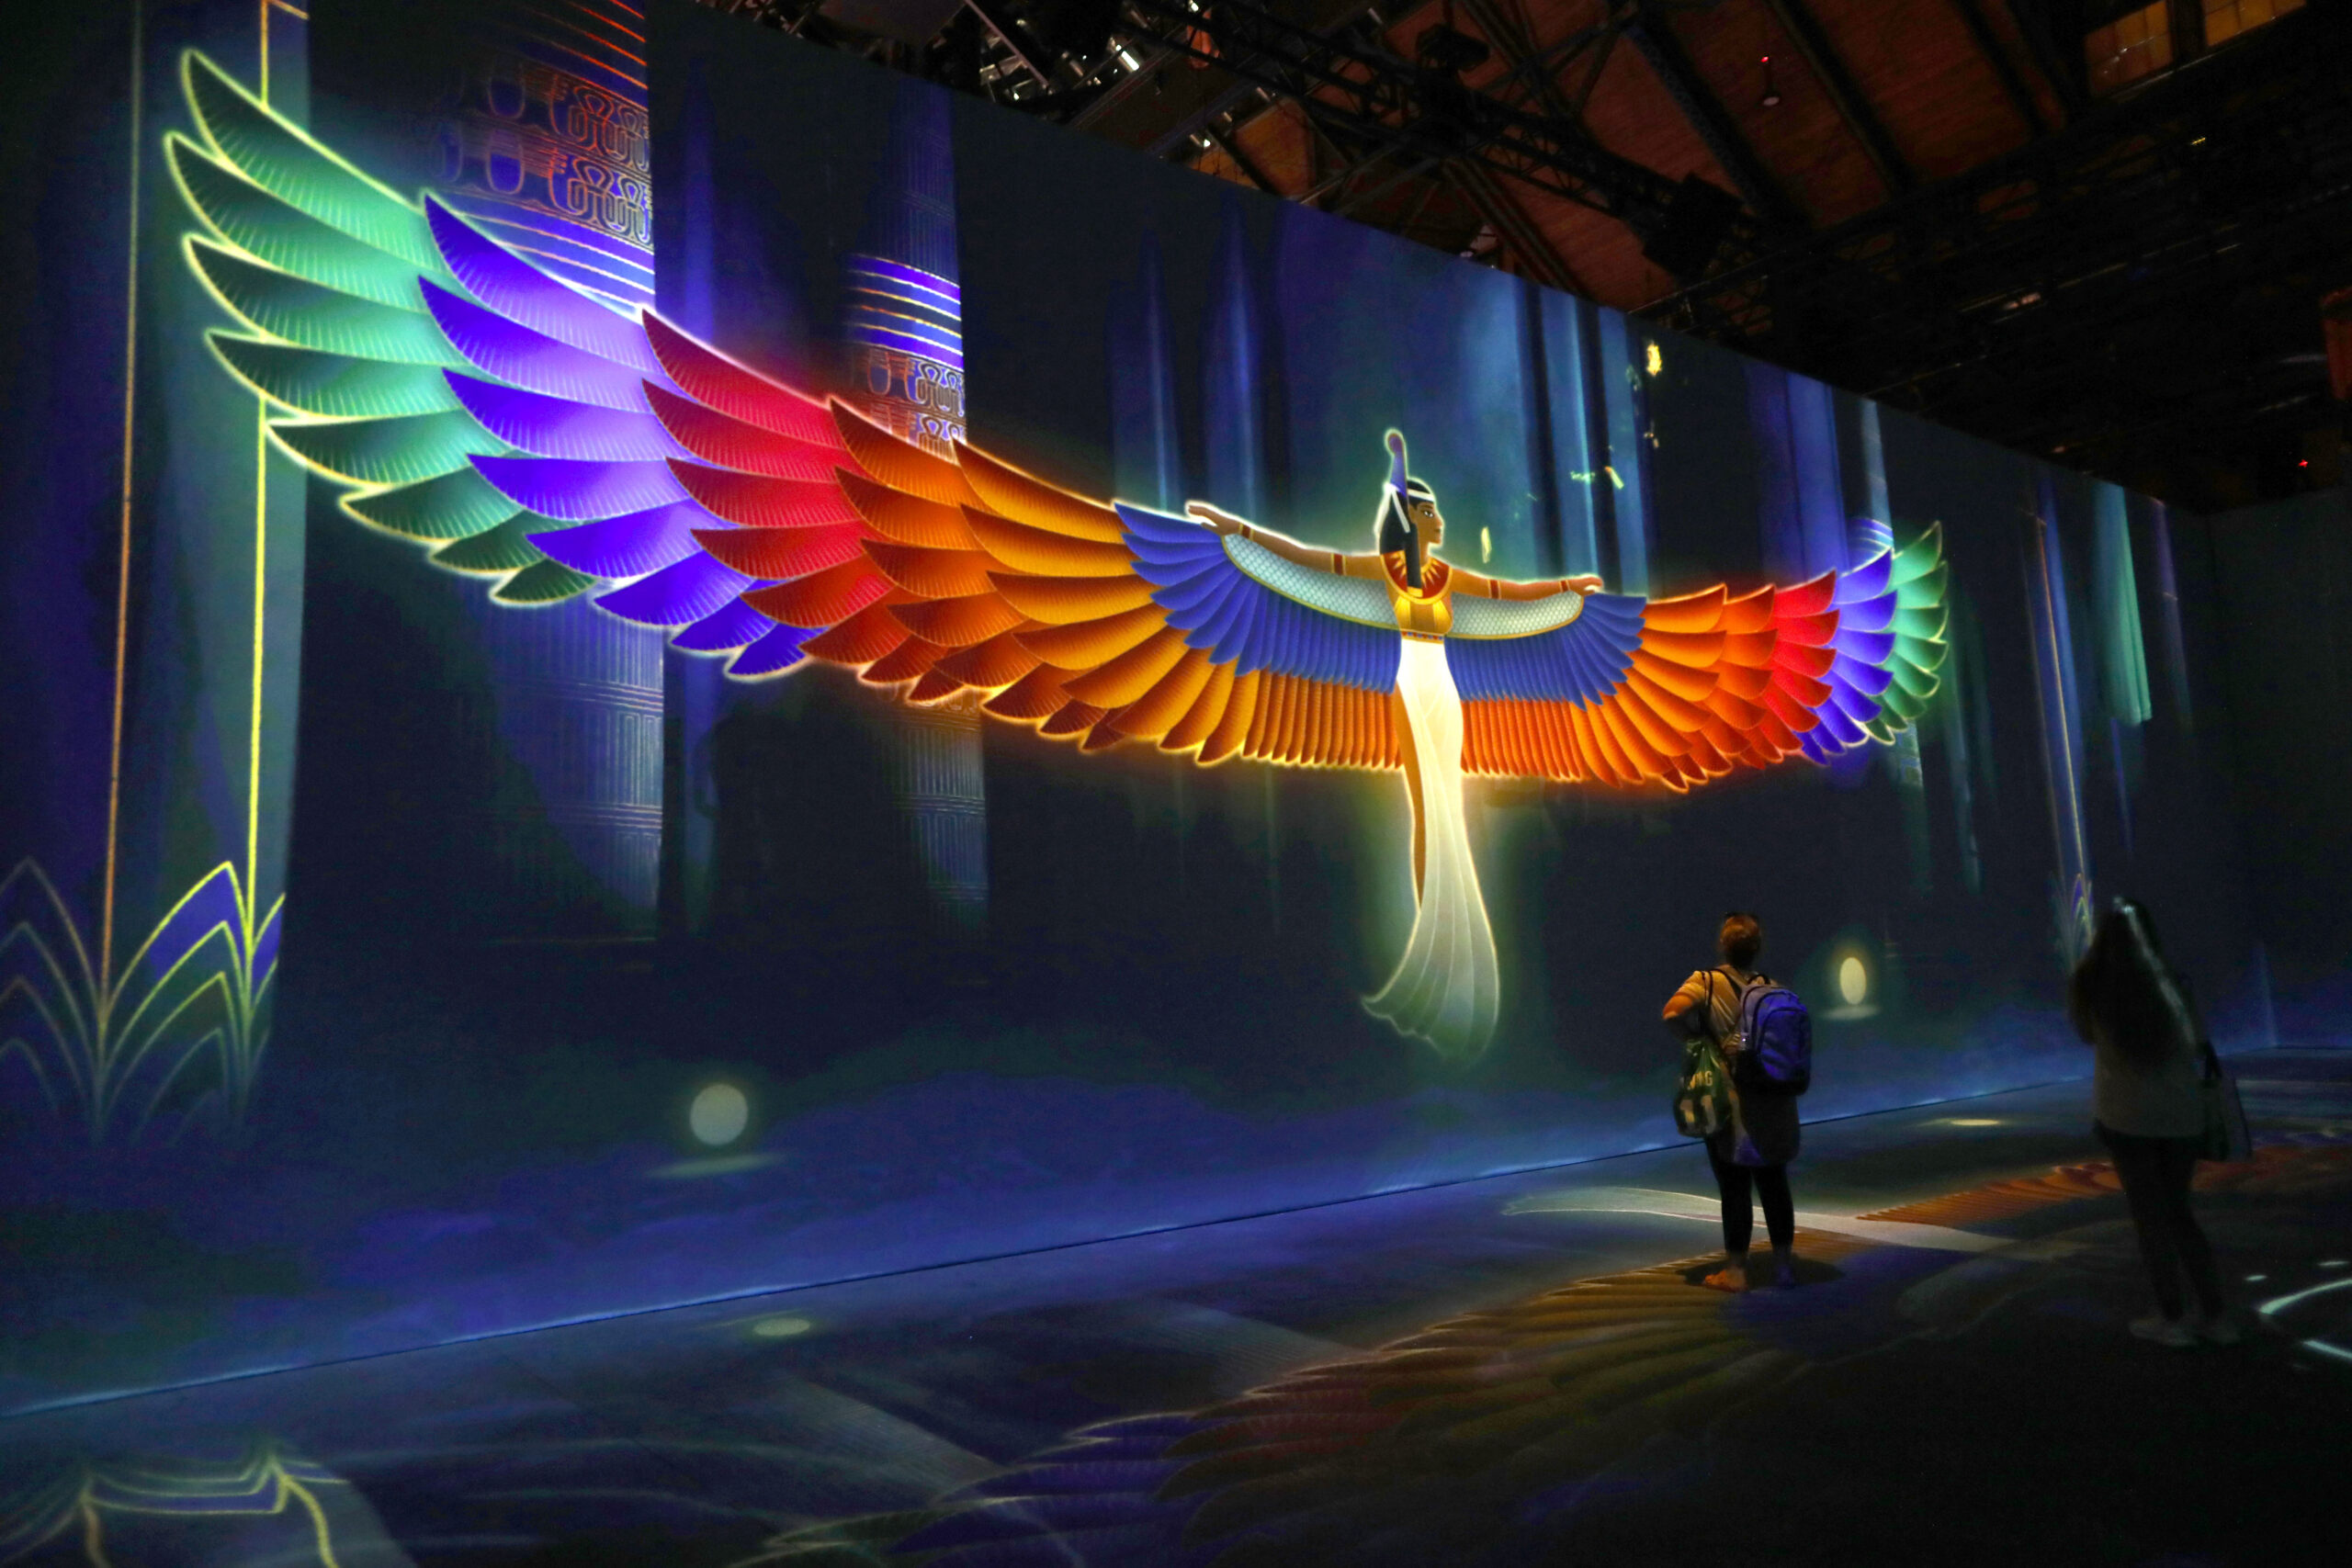 A projected image of the goddess Isis with wings spread - in one of the Beyond King Tut Immersive exhibit rooms